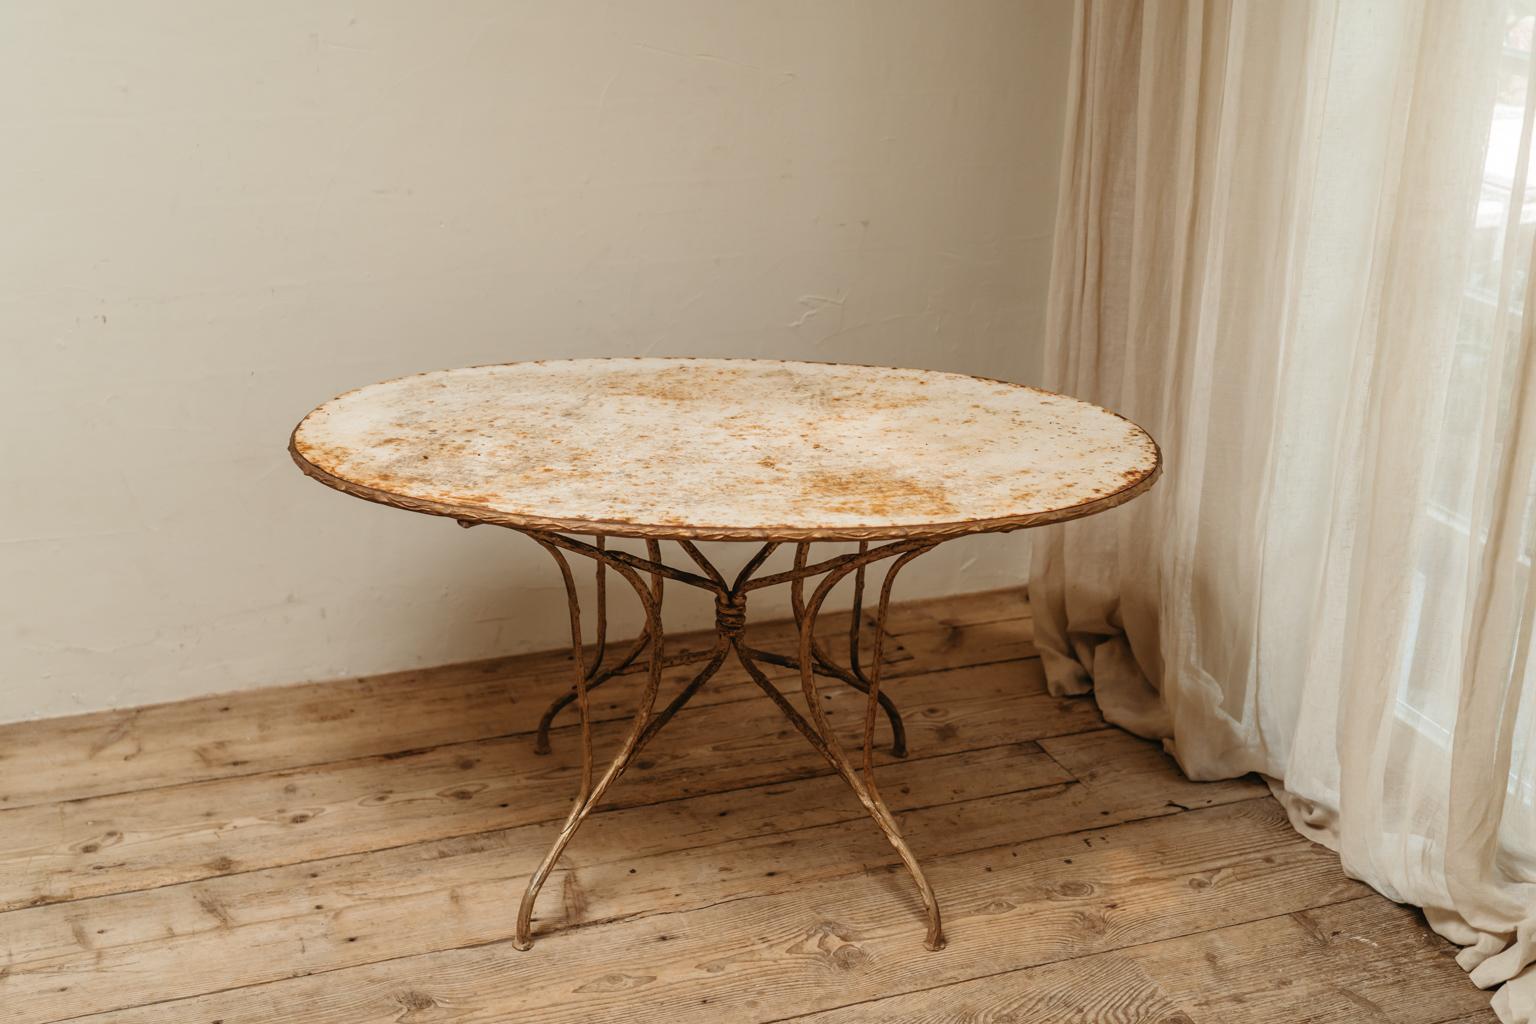 great patina on this very elegant french garden table ... unusual model ... 